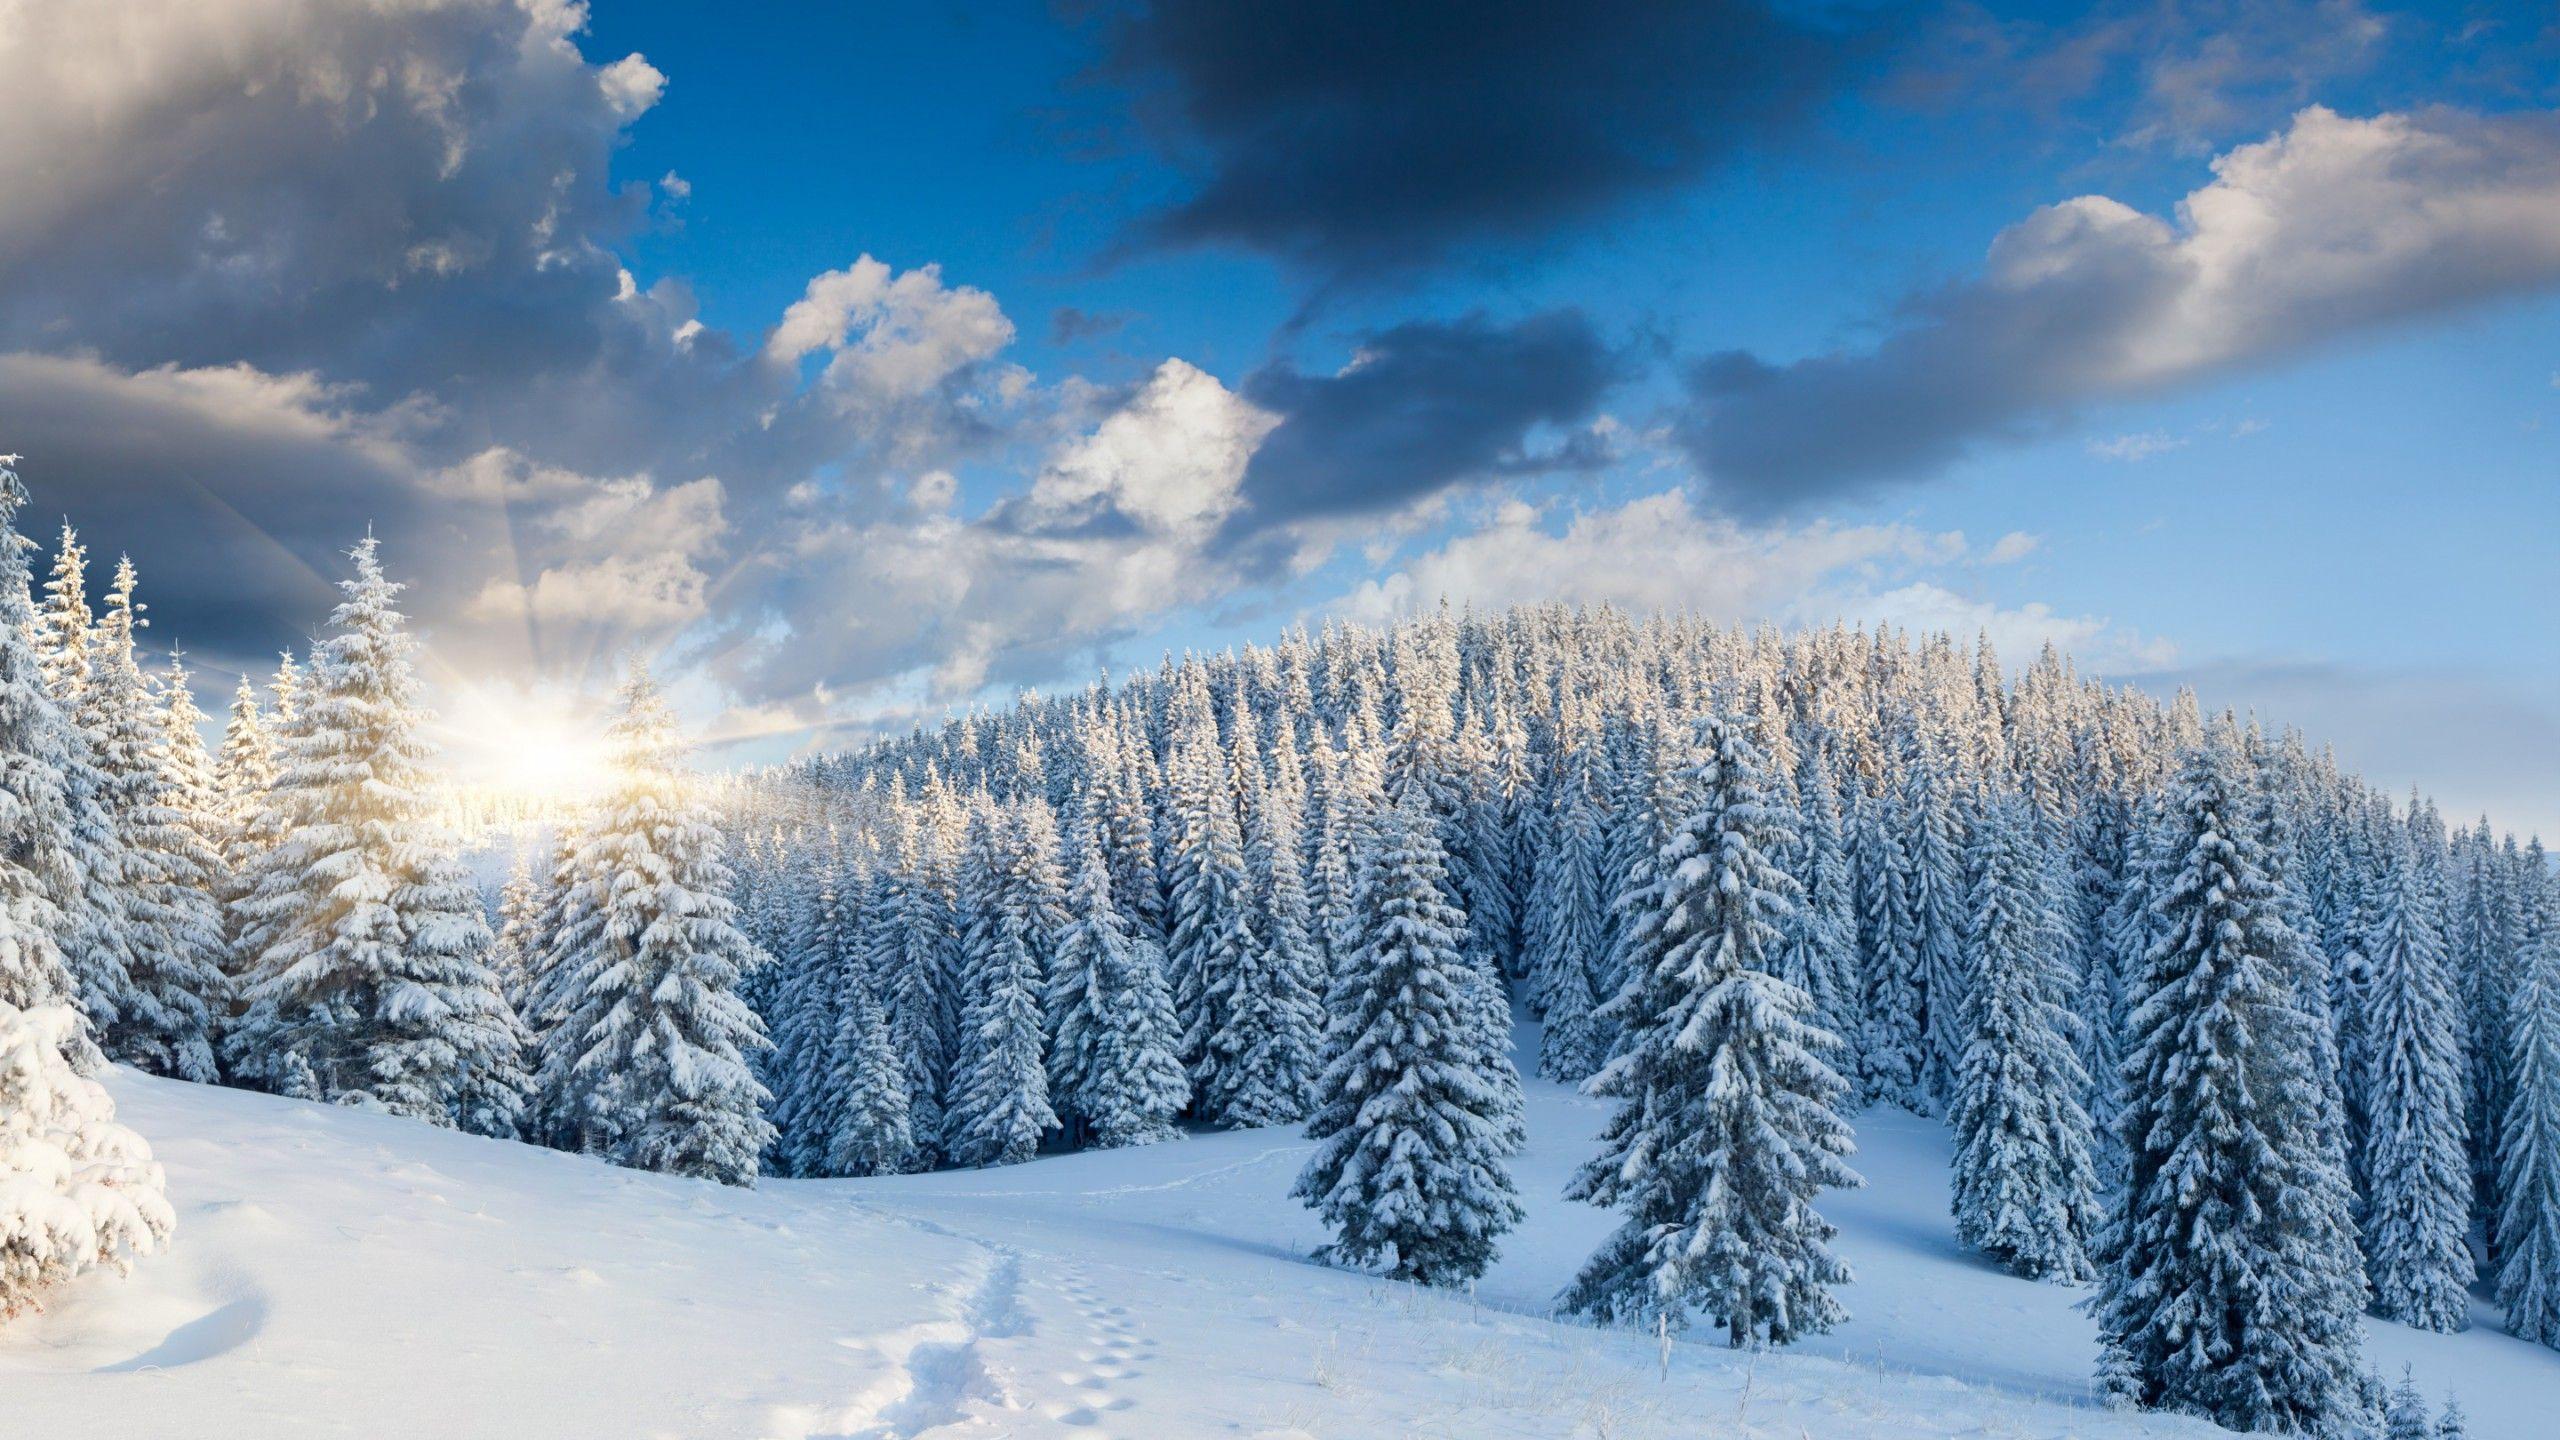 Winter Forest Wallpapers - Top Free Winter Forest Backgrounds